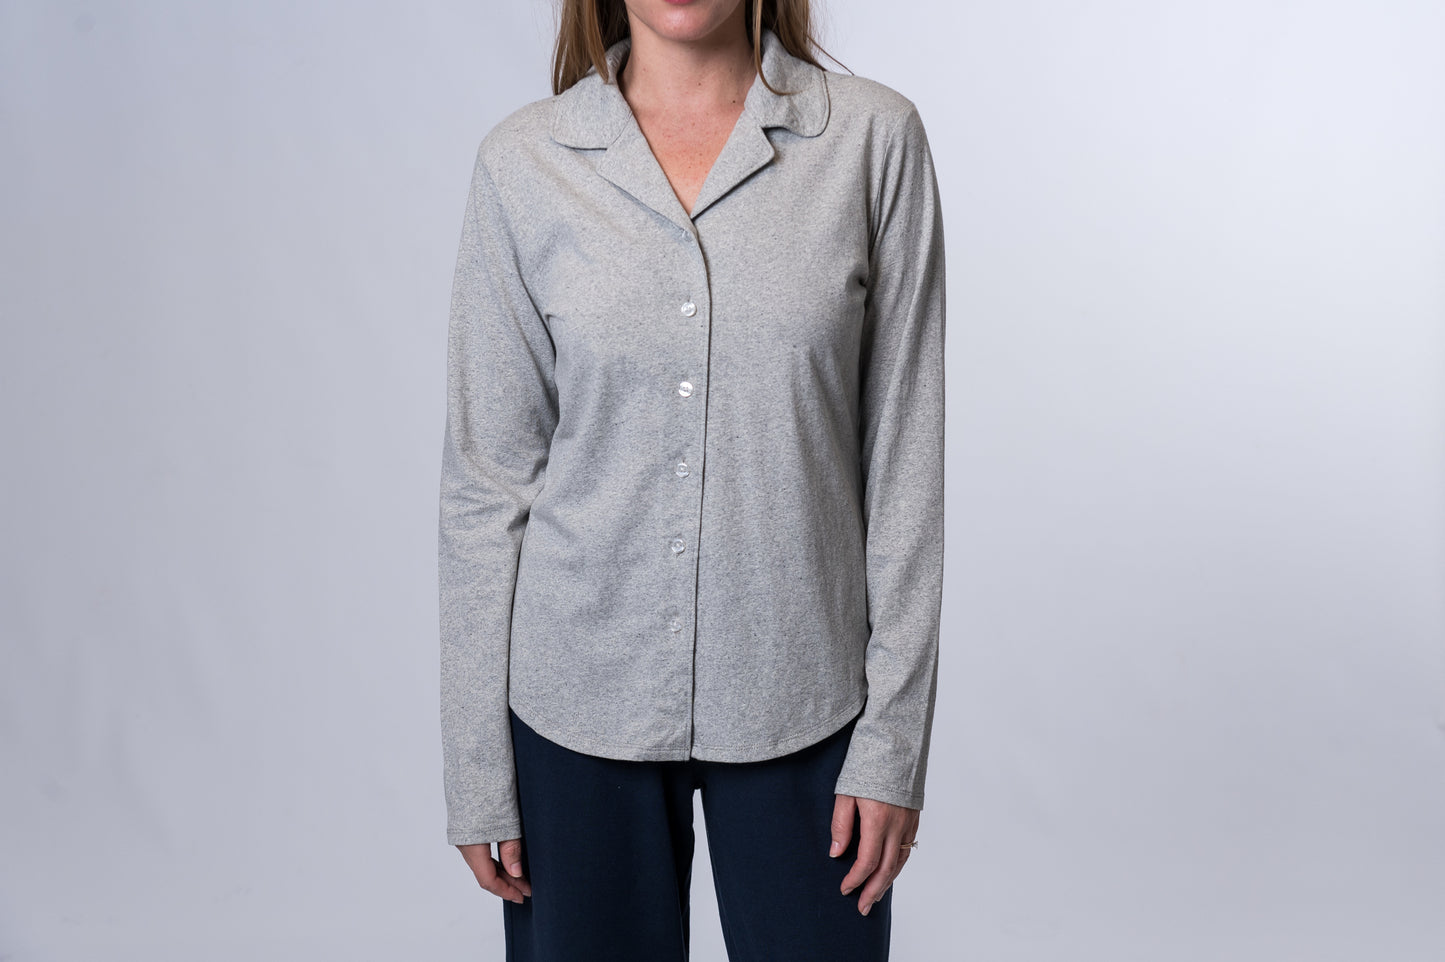 Woman wearing a light gray, long sleeve, button down sleep shirt and navy blue lounge pants. Front of clothing is being shown